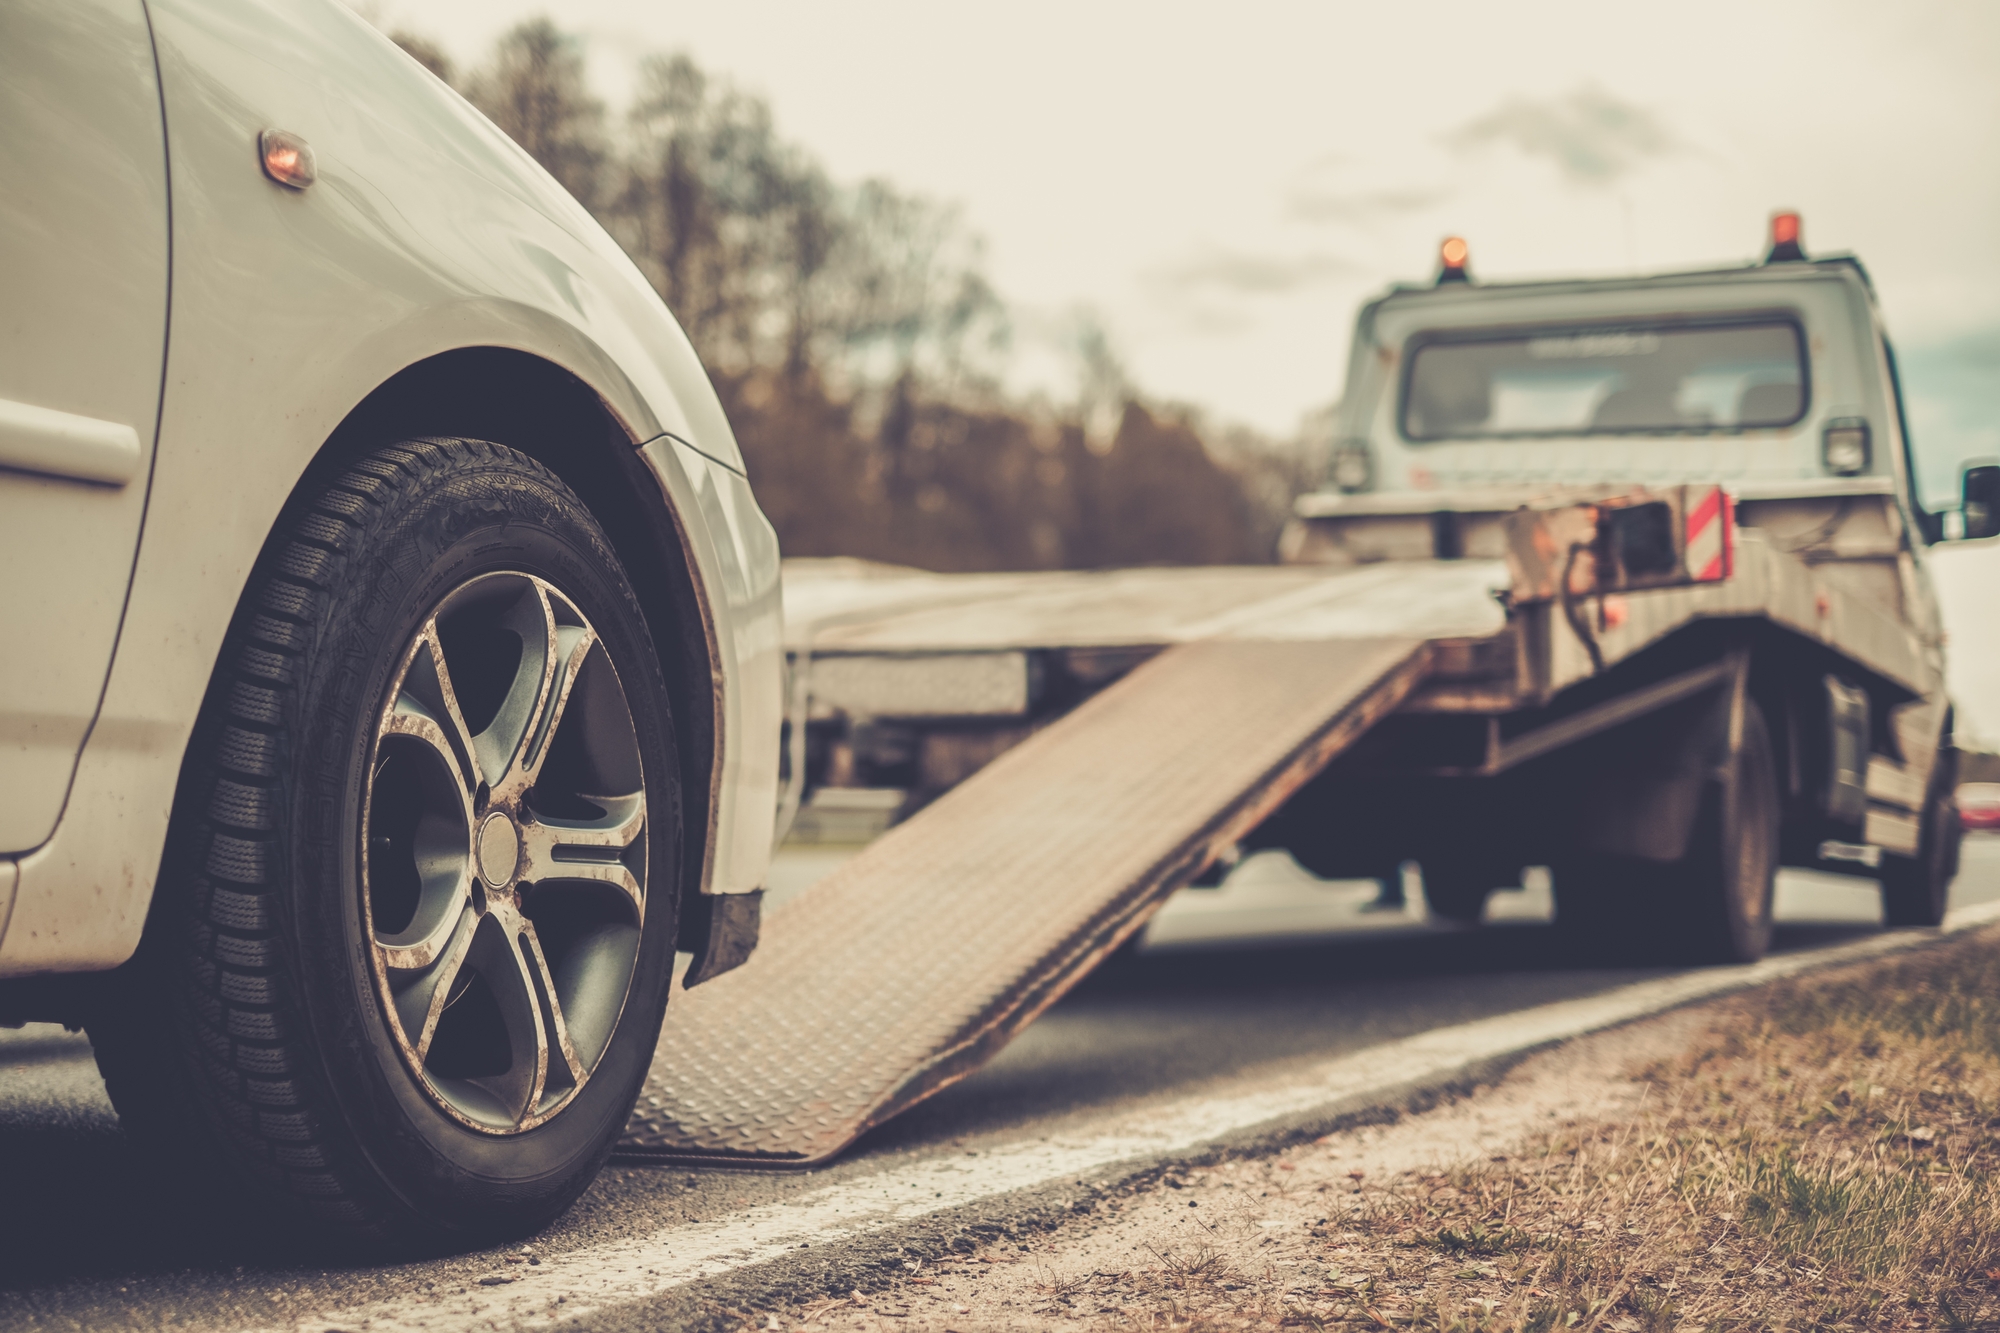 Finding The Right Car Accident Lawyer - Loading broken car on a tow truck on a roadside